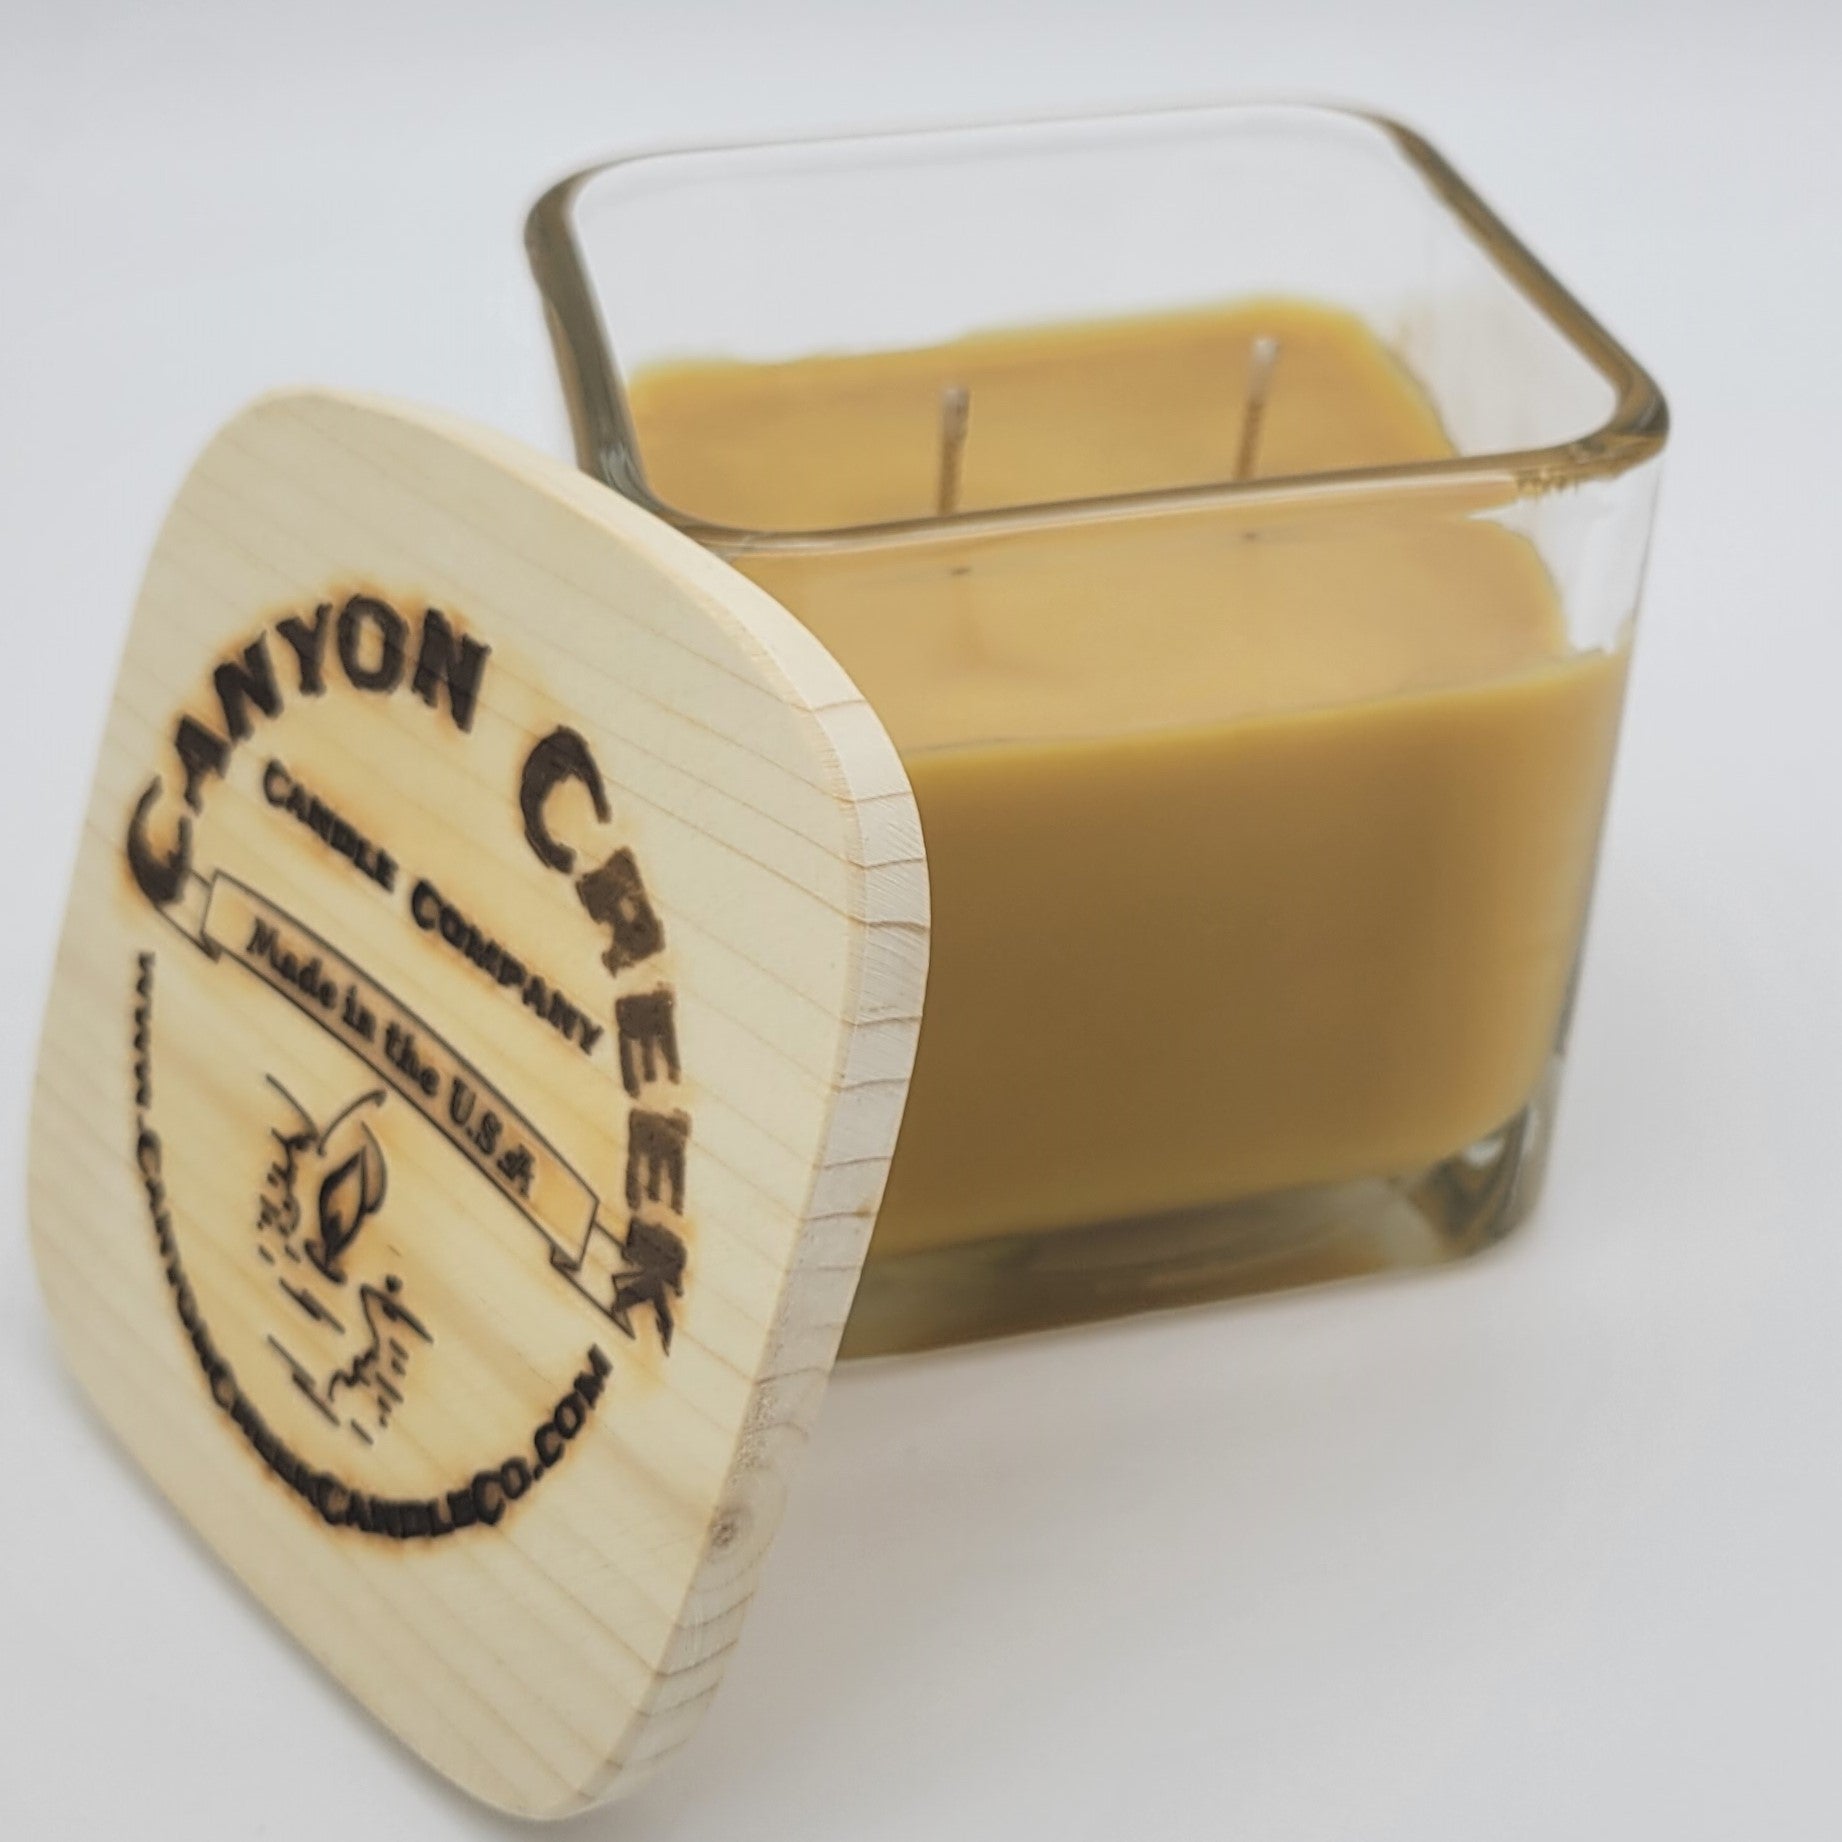 Spiced Vanilla and Sweet Crème Candle